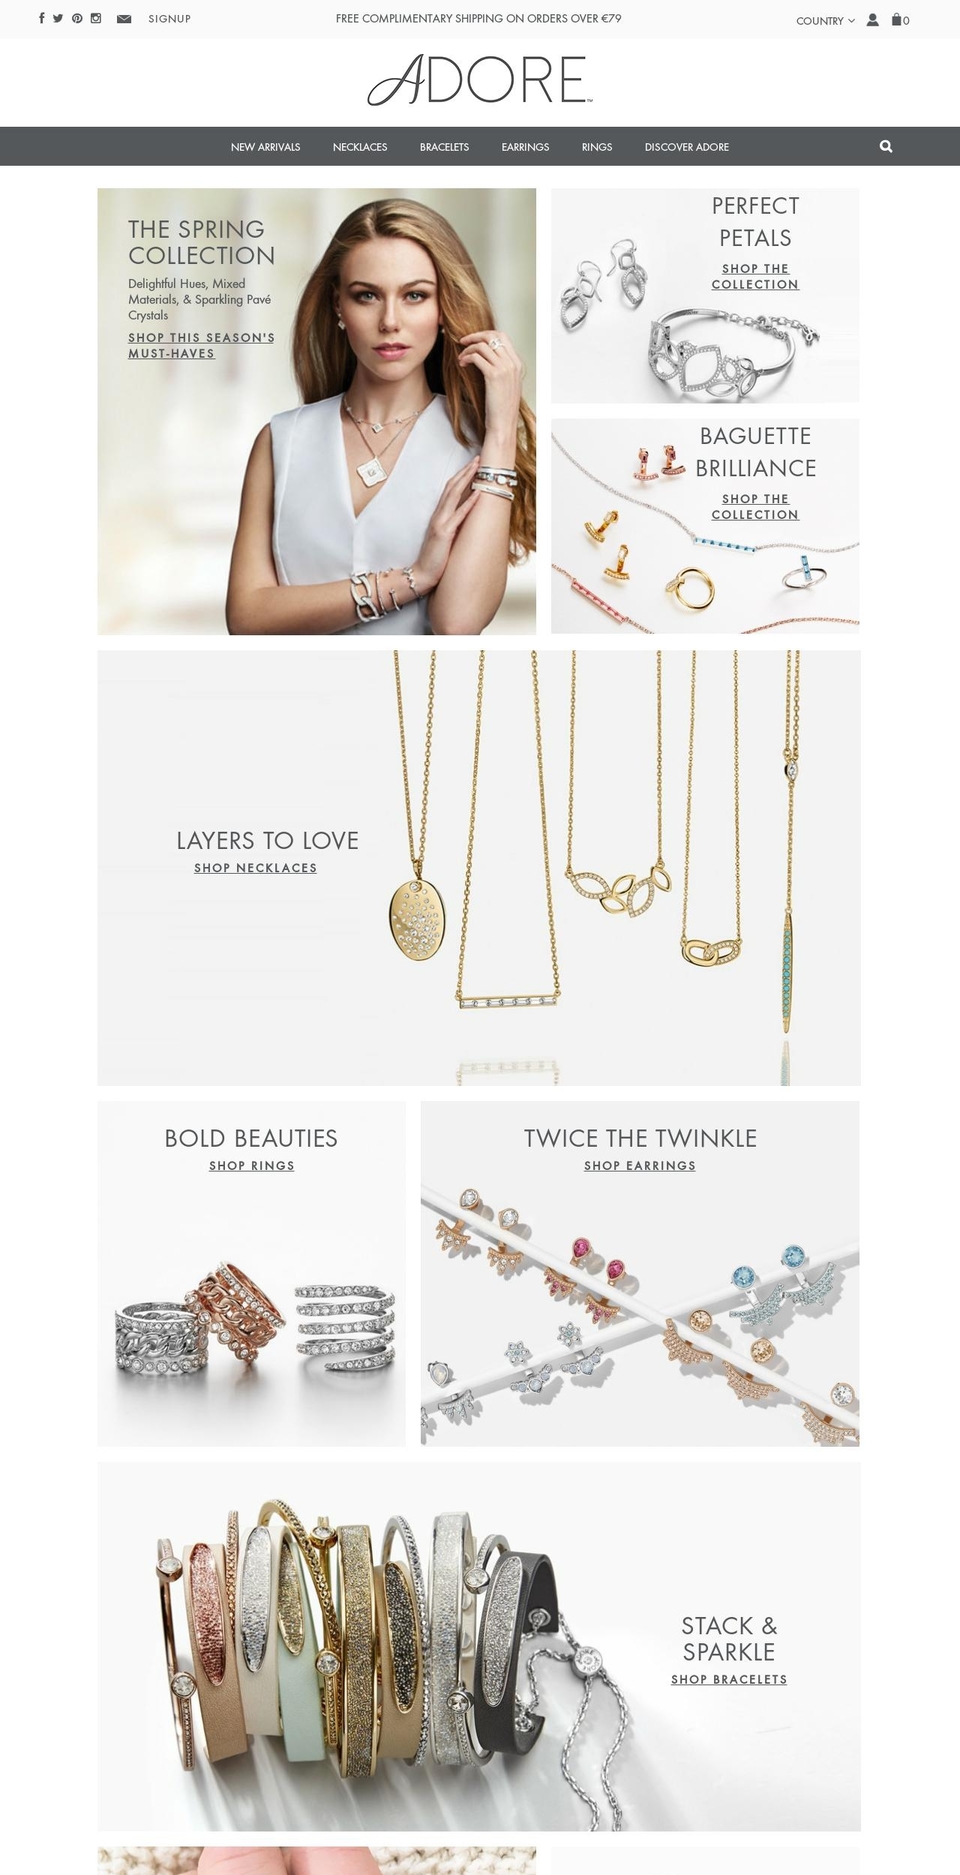 January Refresh Shopify theme site example moretoadore.in